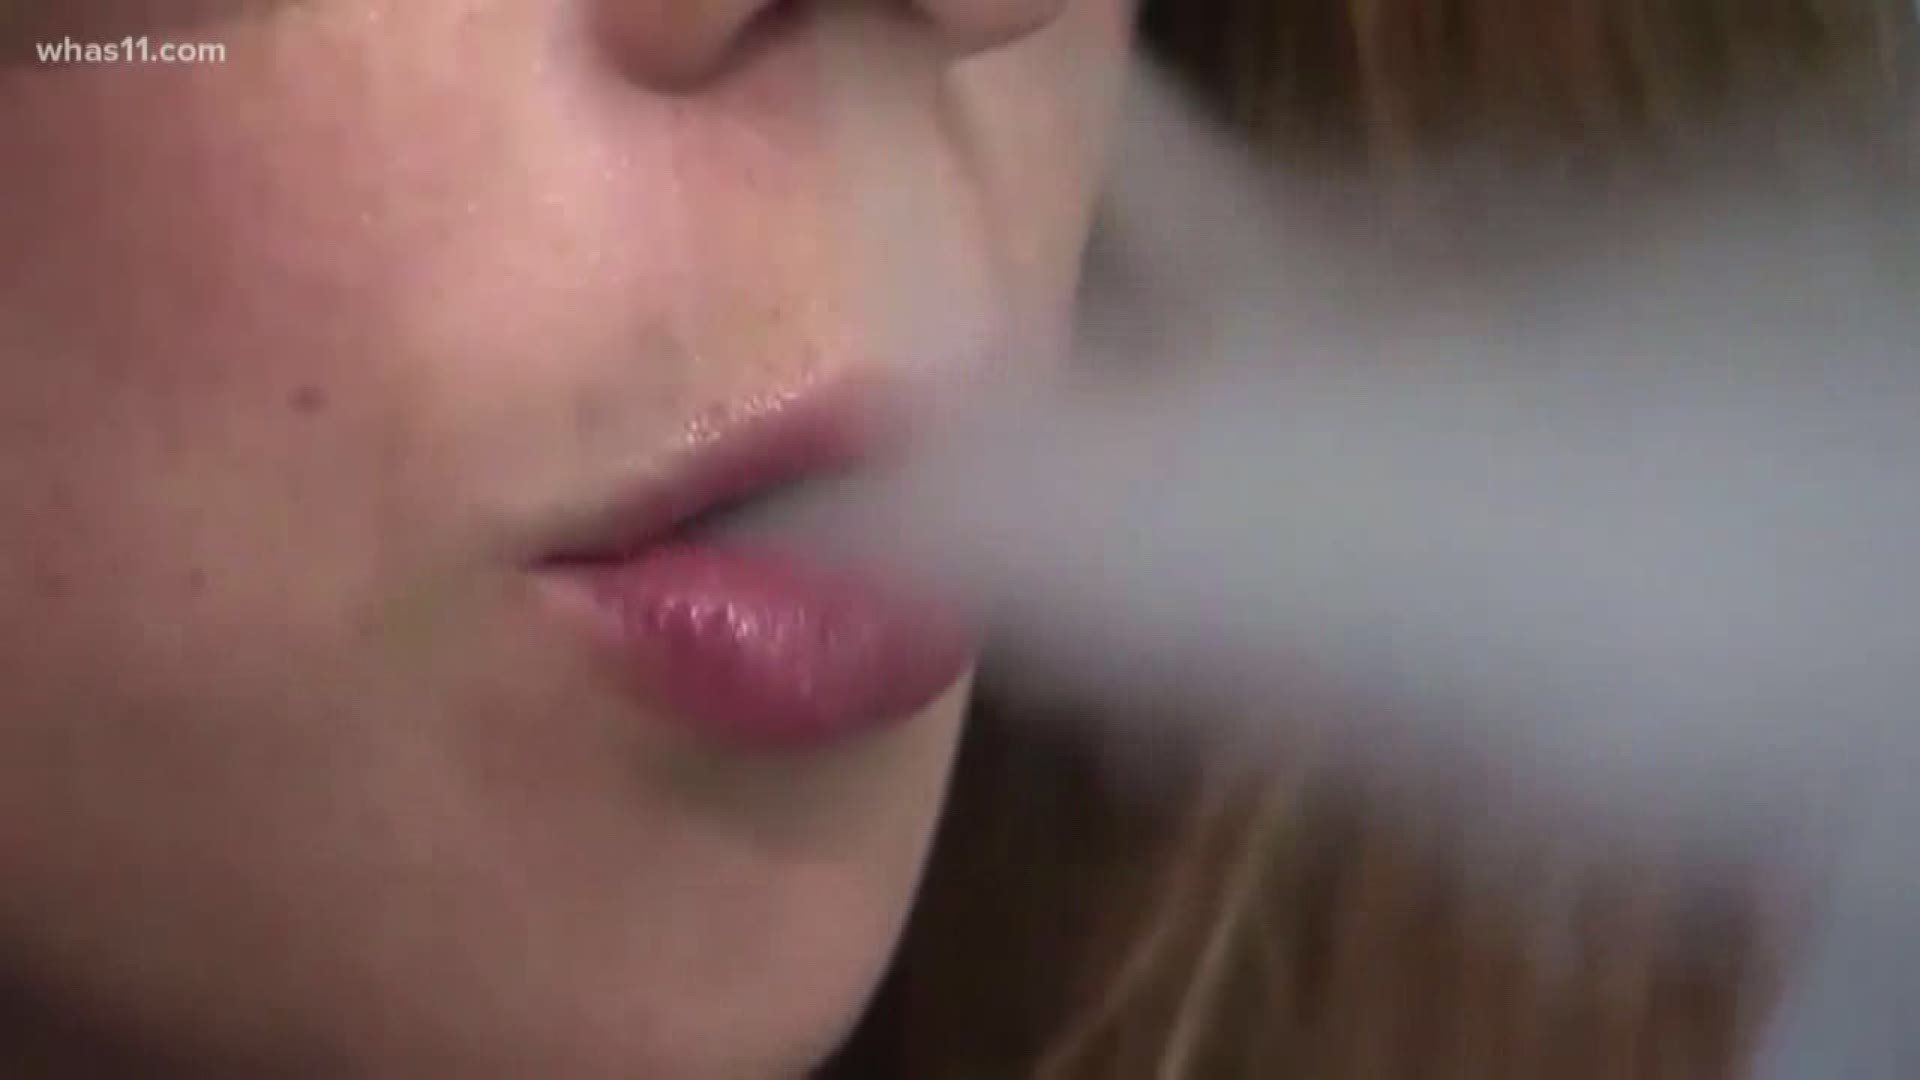 There have been three vaping related deaths in the state.